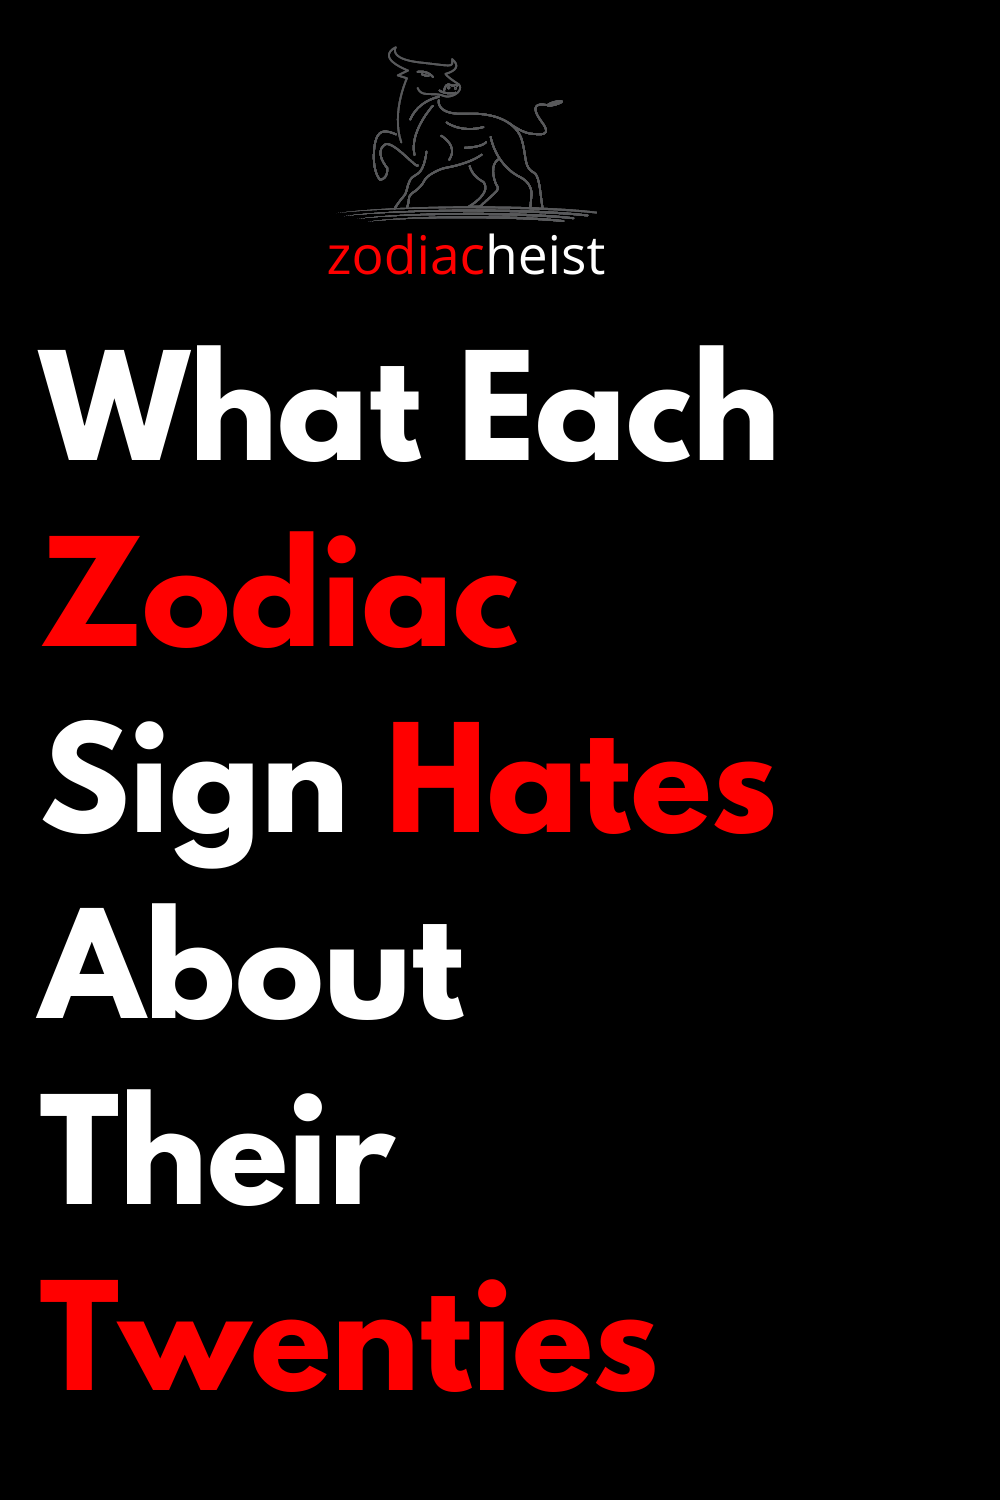 What Each Zodiac Sign Hates About Their Twenties